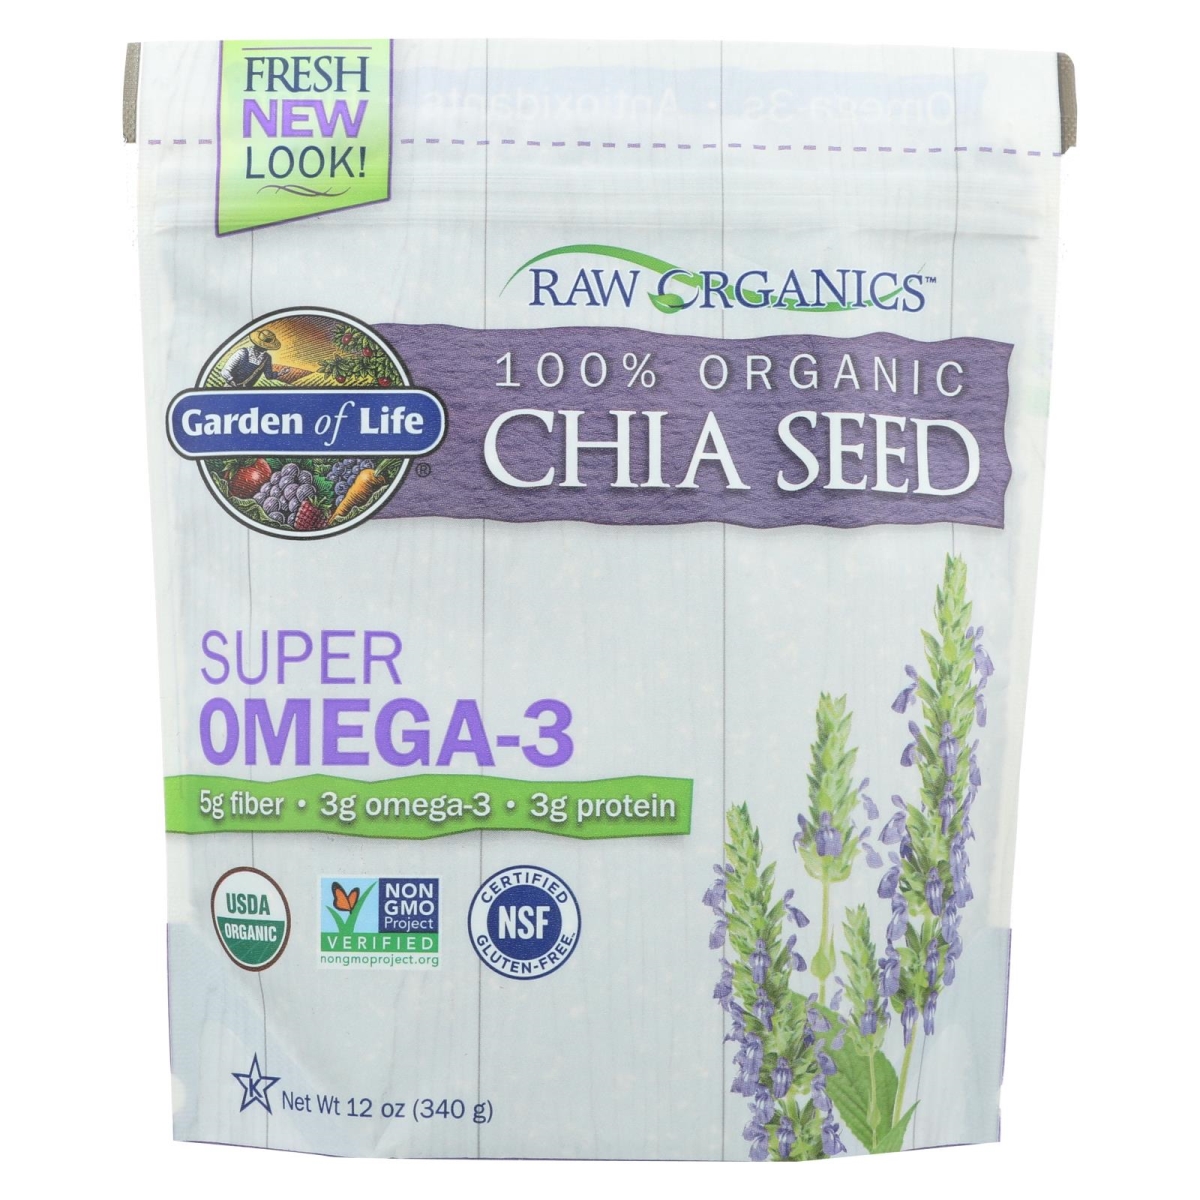 Picture of Garden of Life 2314763 12 oz Raw Organics Chia Seed